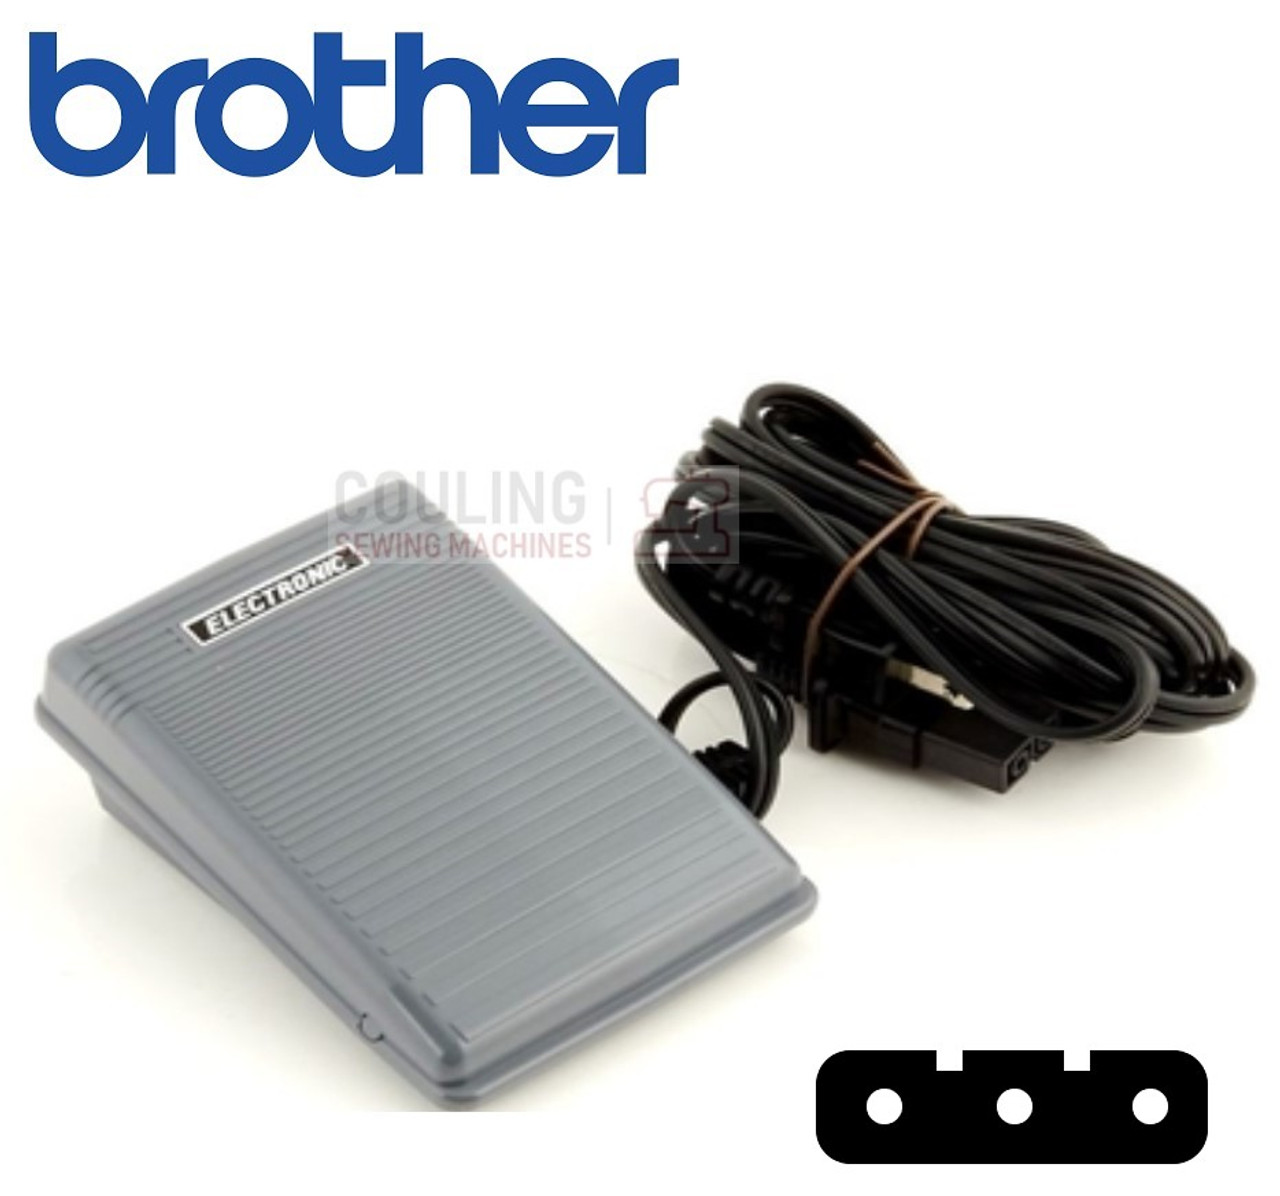 Genuine BROTHER Sewing Machine 3 Prong Foot Control Pedal Power